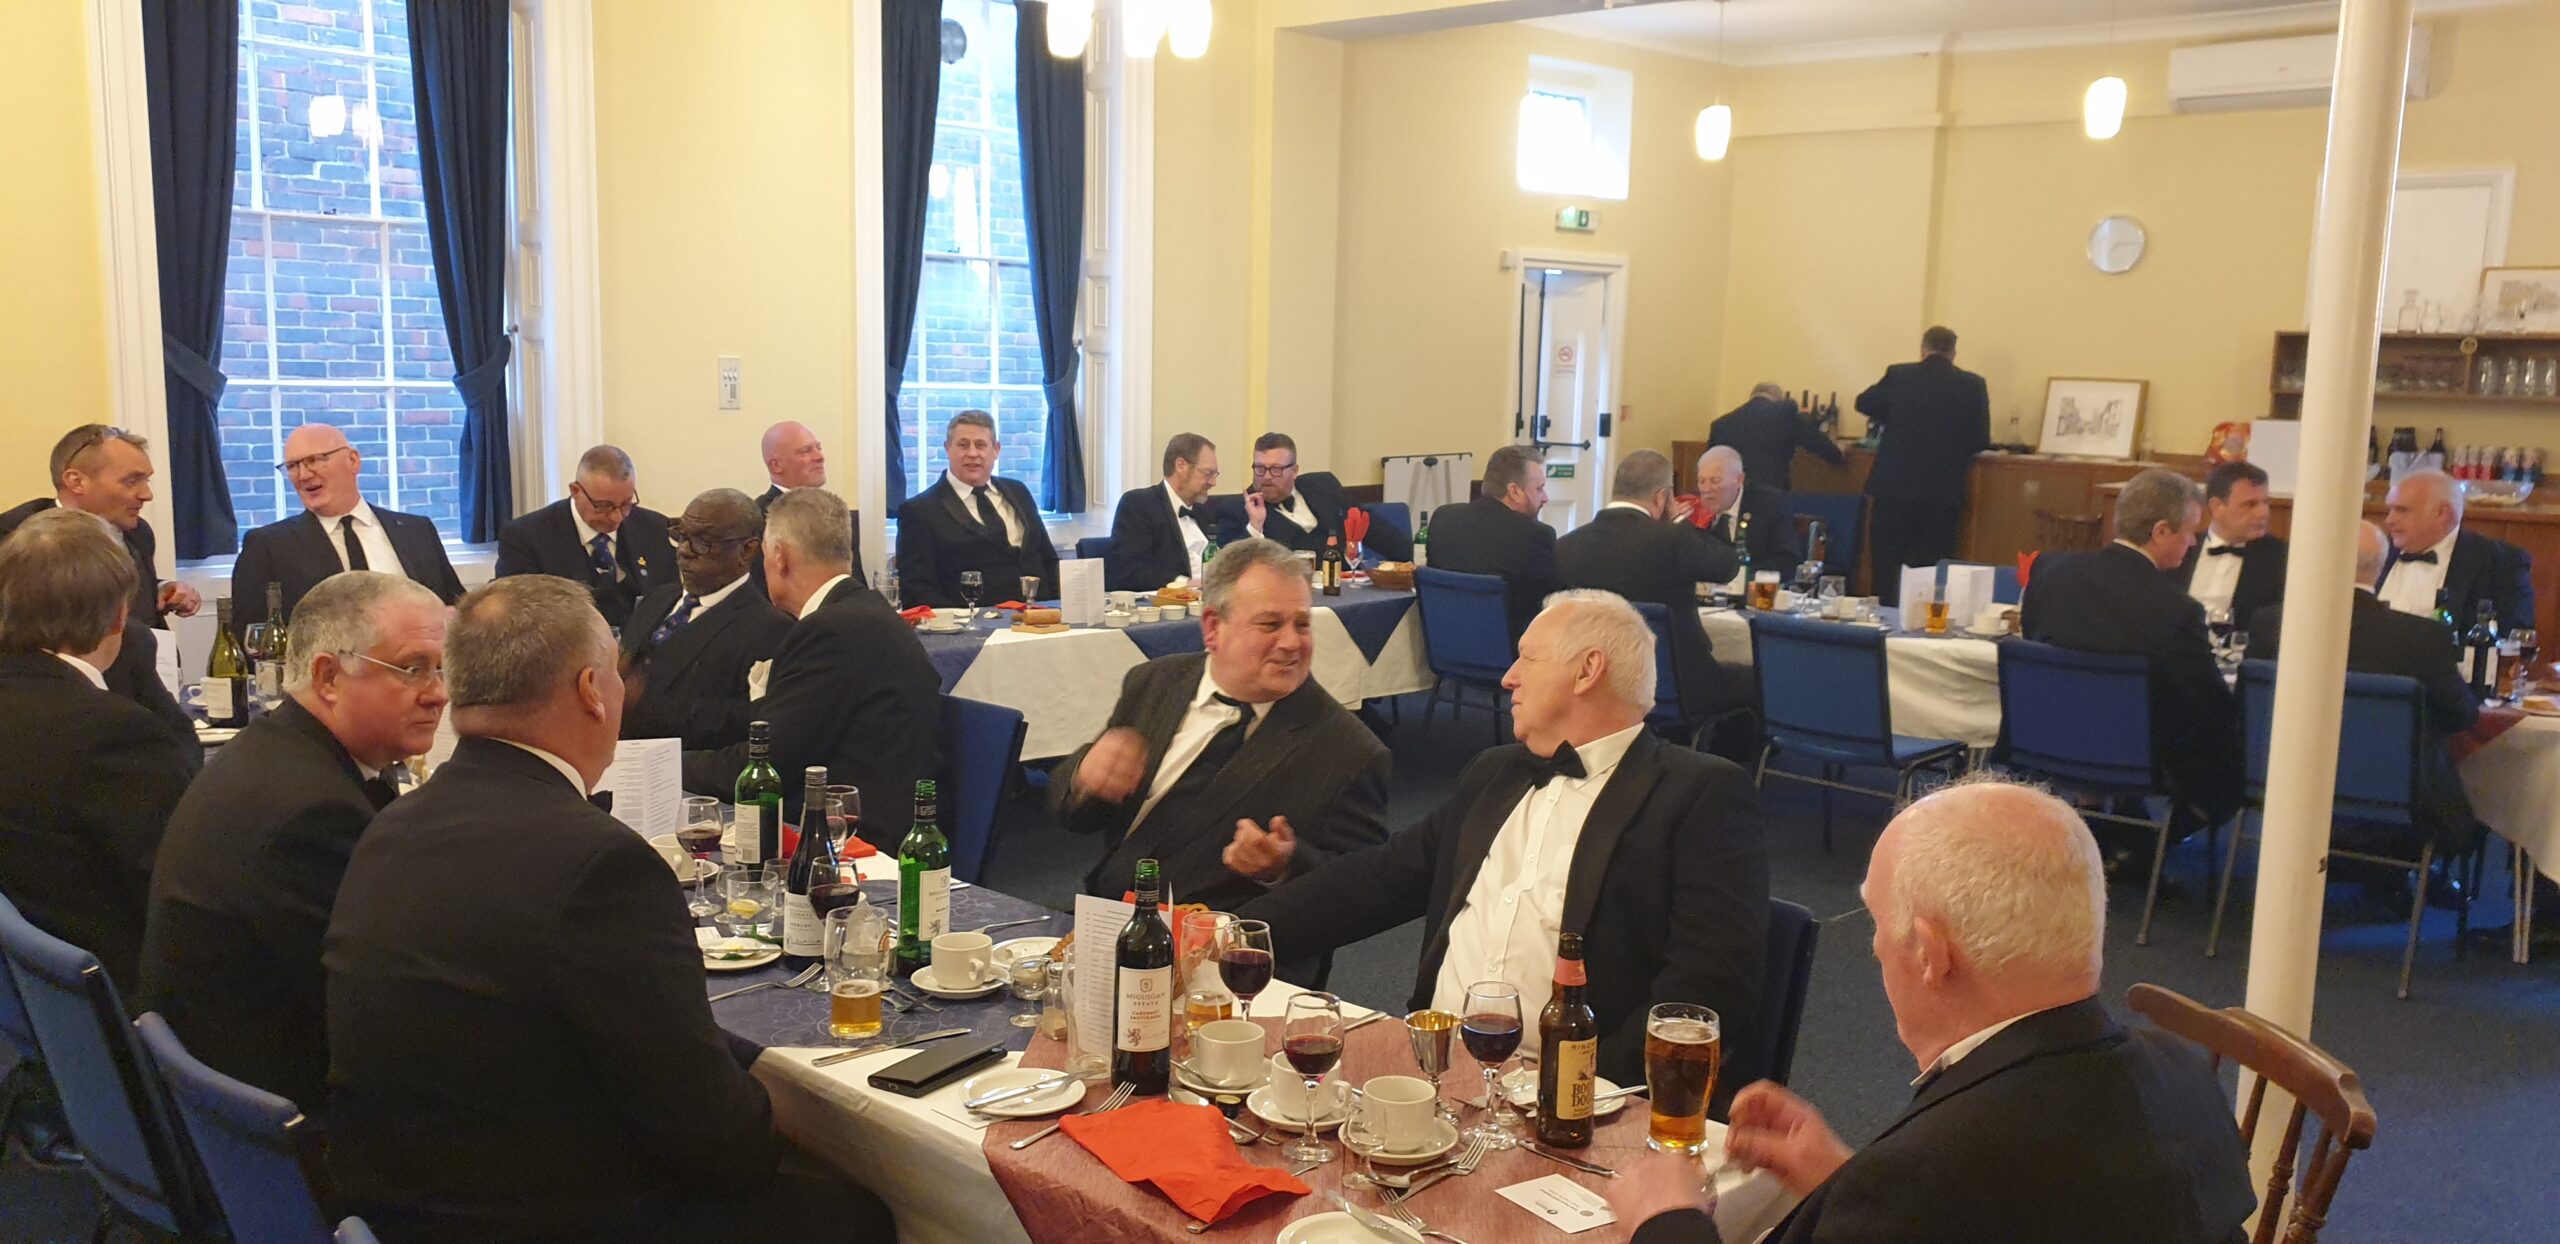 A photo of lodge members enjoying each others company at the festive board meal. 